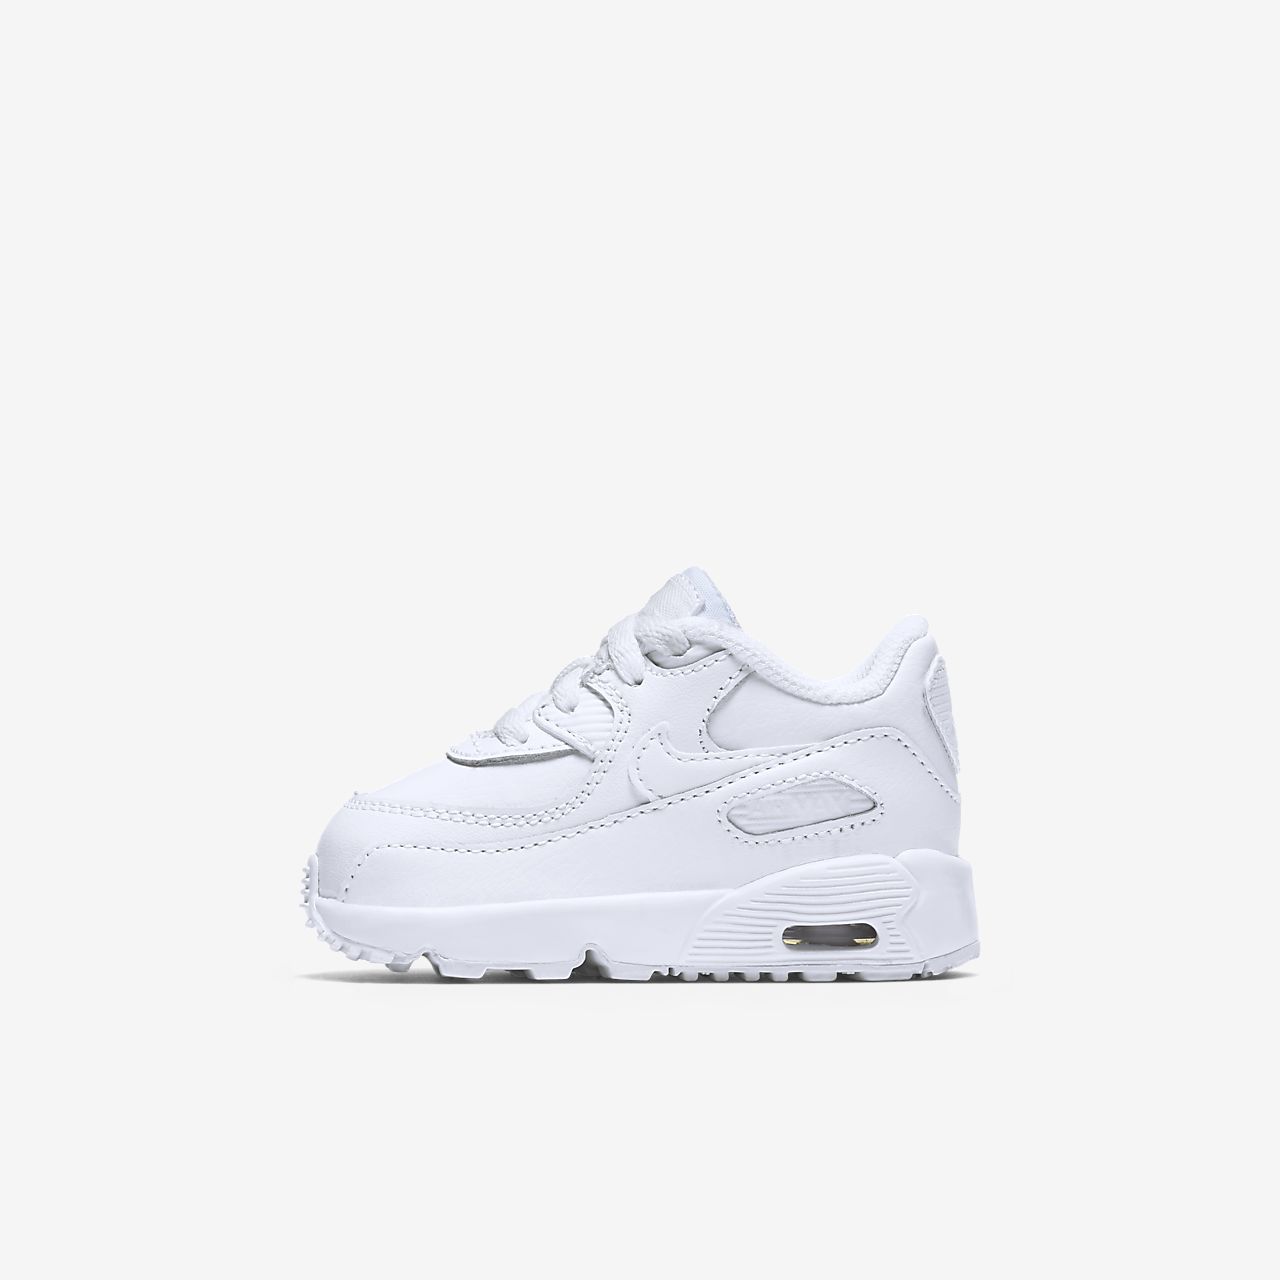 Nike Air Max 90 Leather Baby & Toddler Shoe. EG